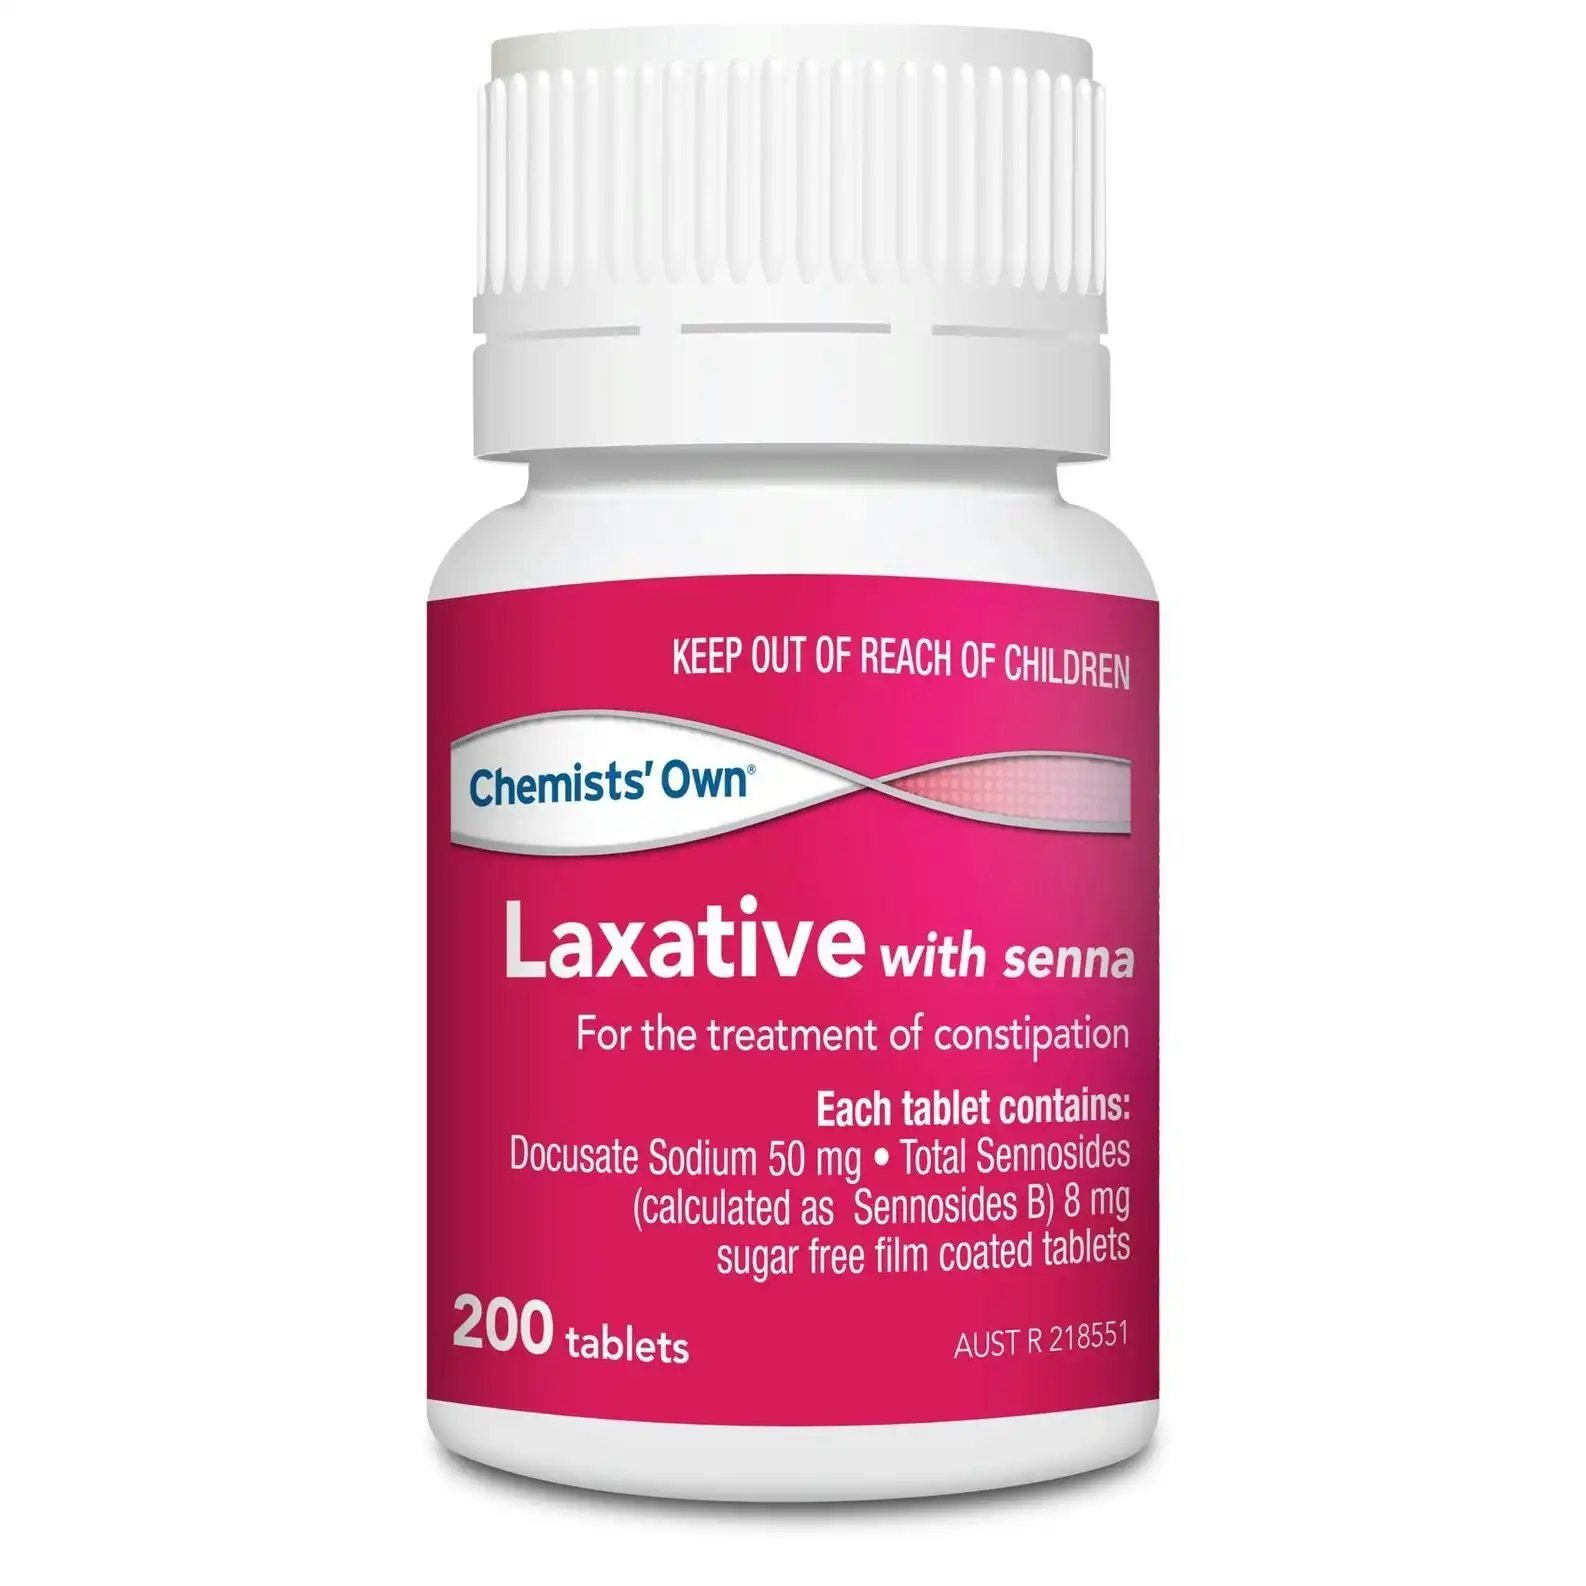 Chemists' Own Laxative with Senna 200 Tablets (Generic of COLOXY WITH SENNA)